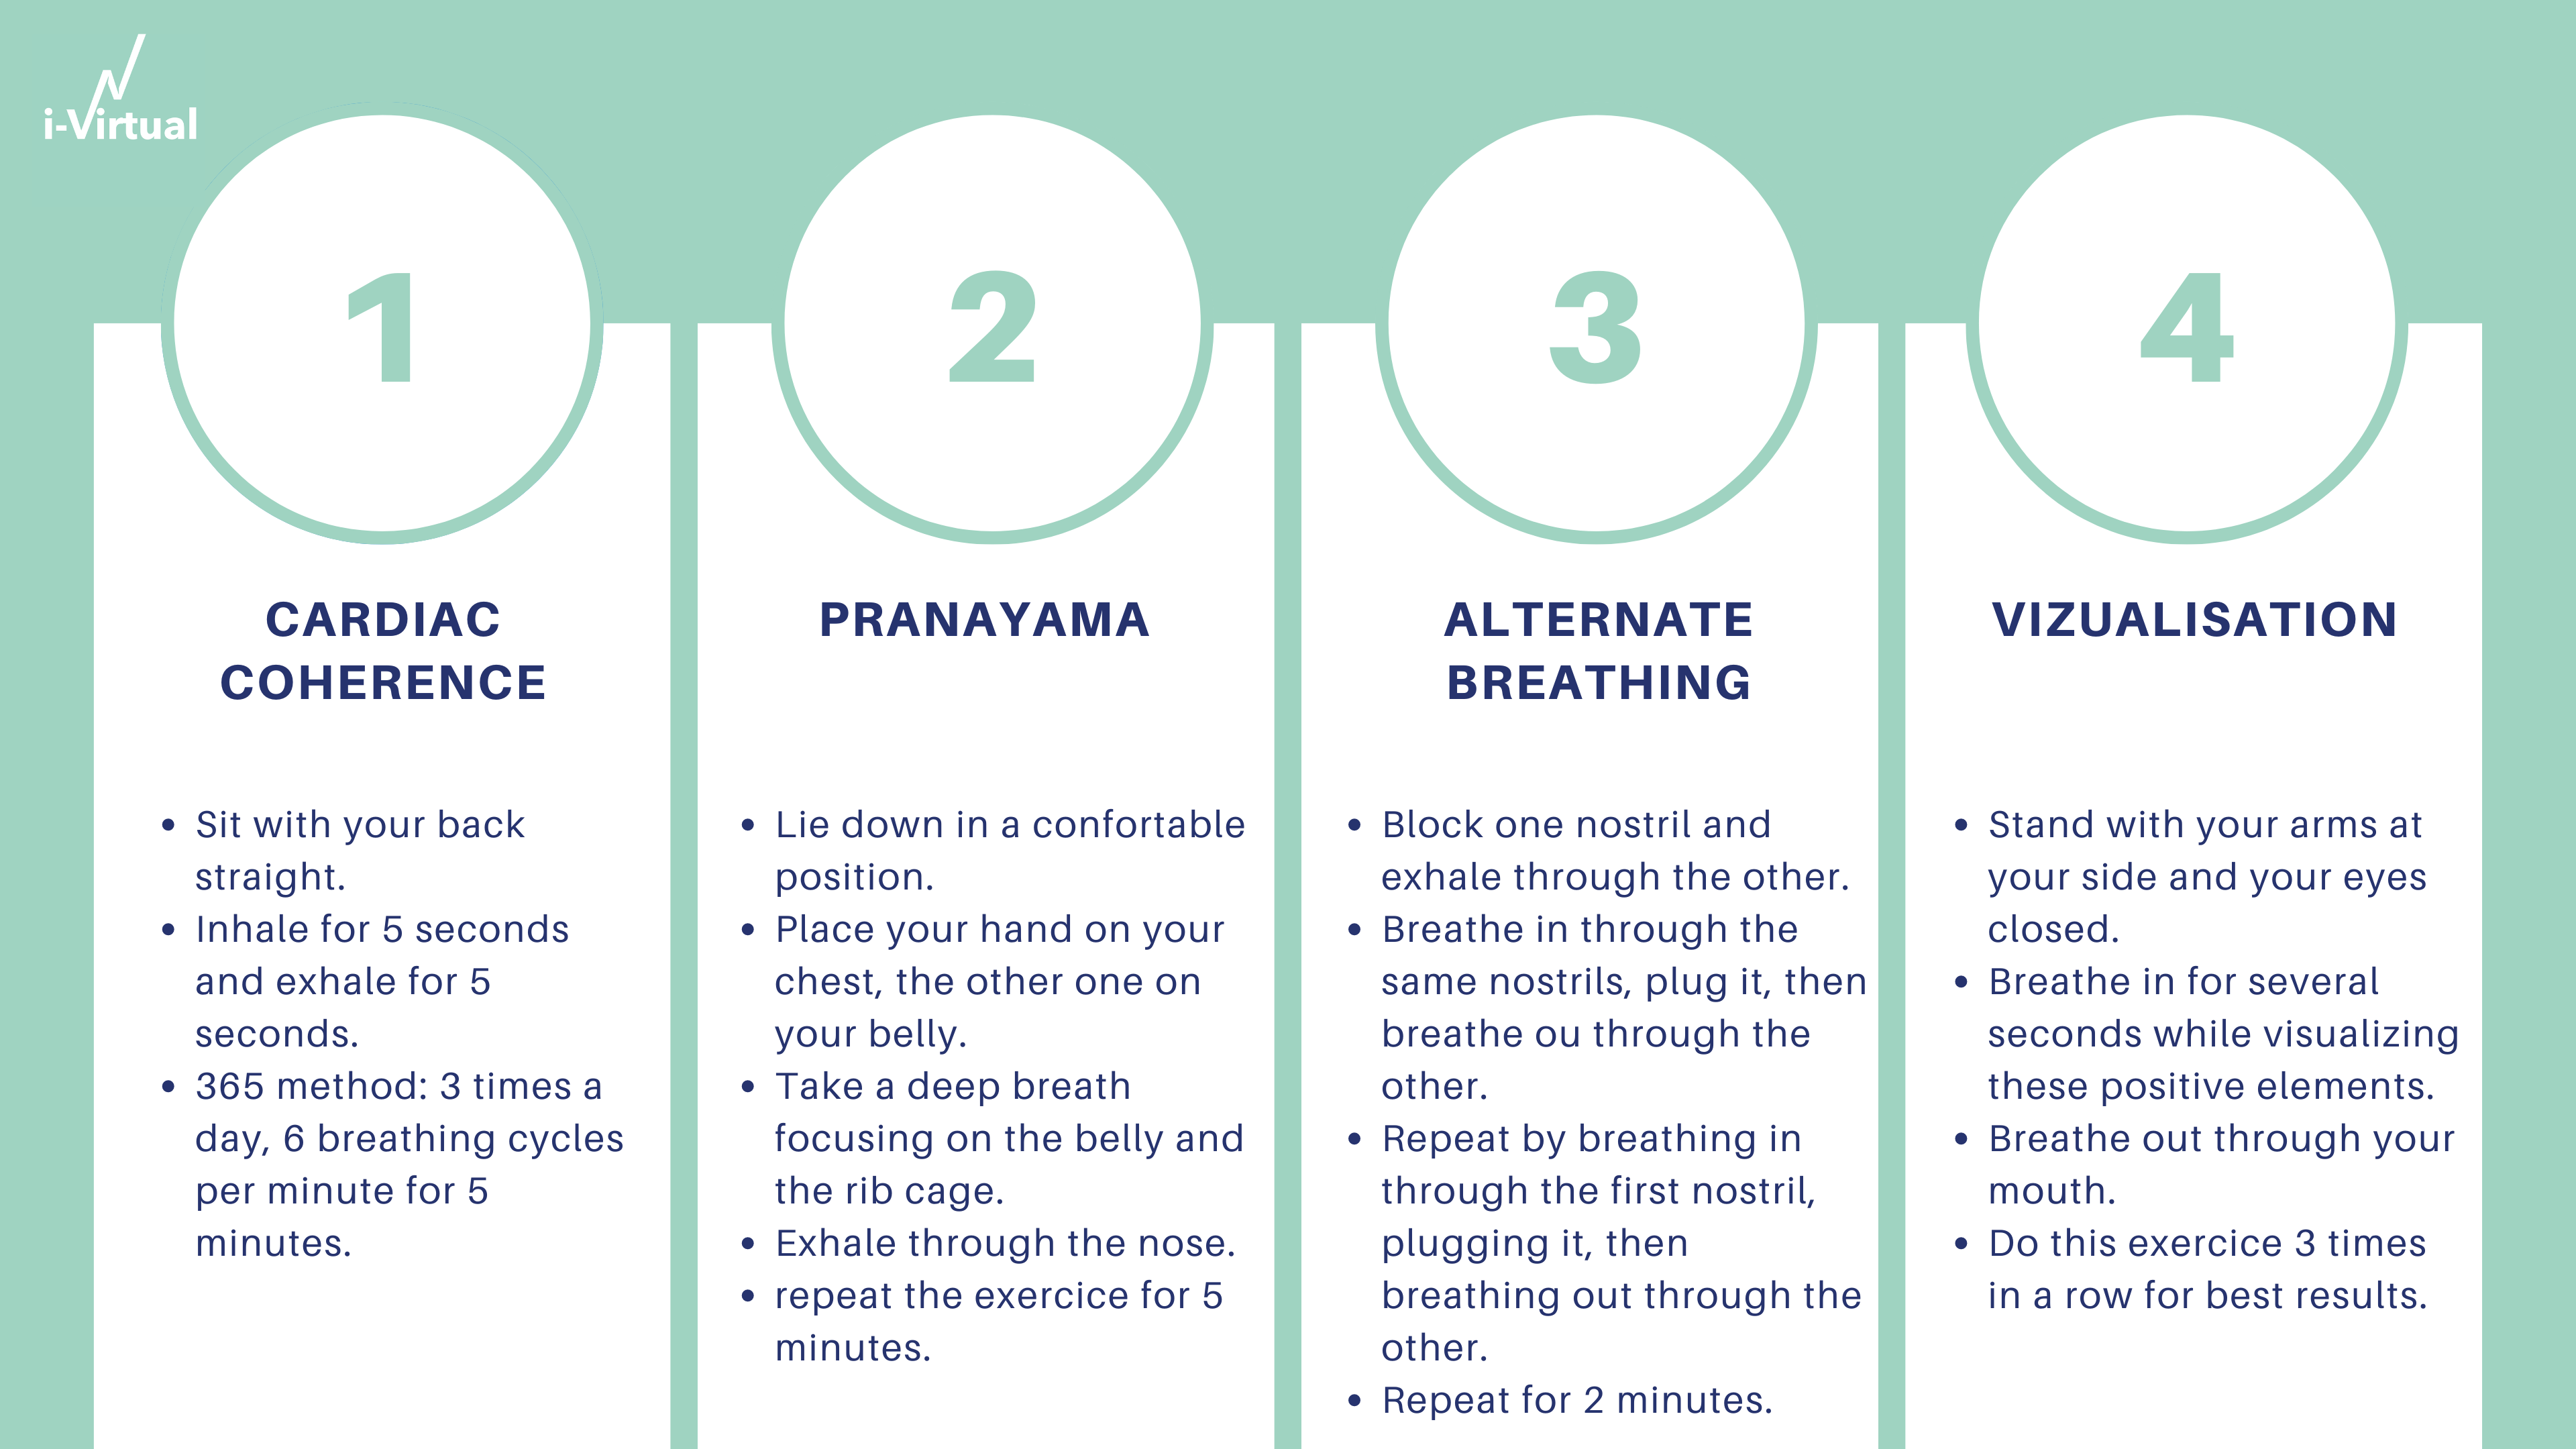 4 exercises to manage your breathing